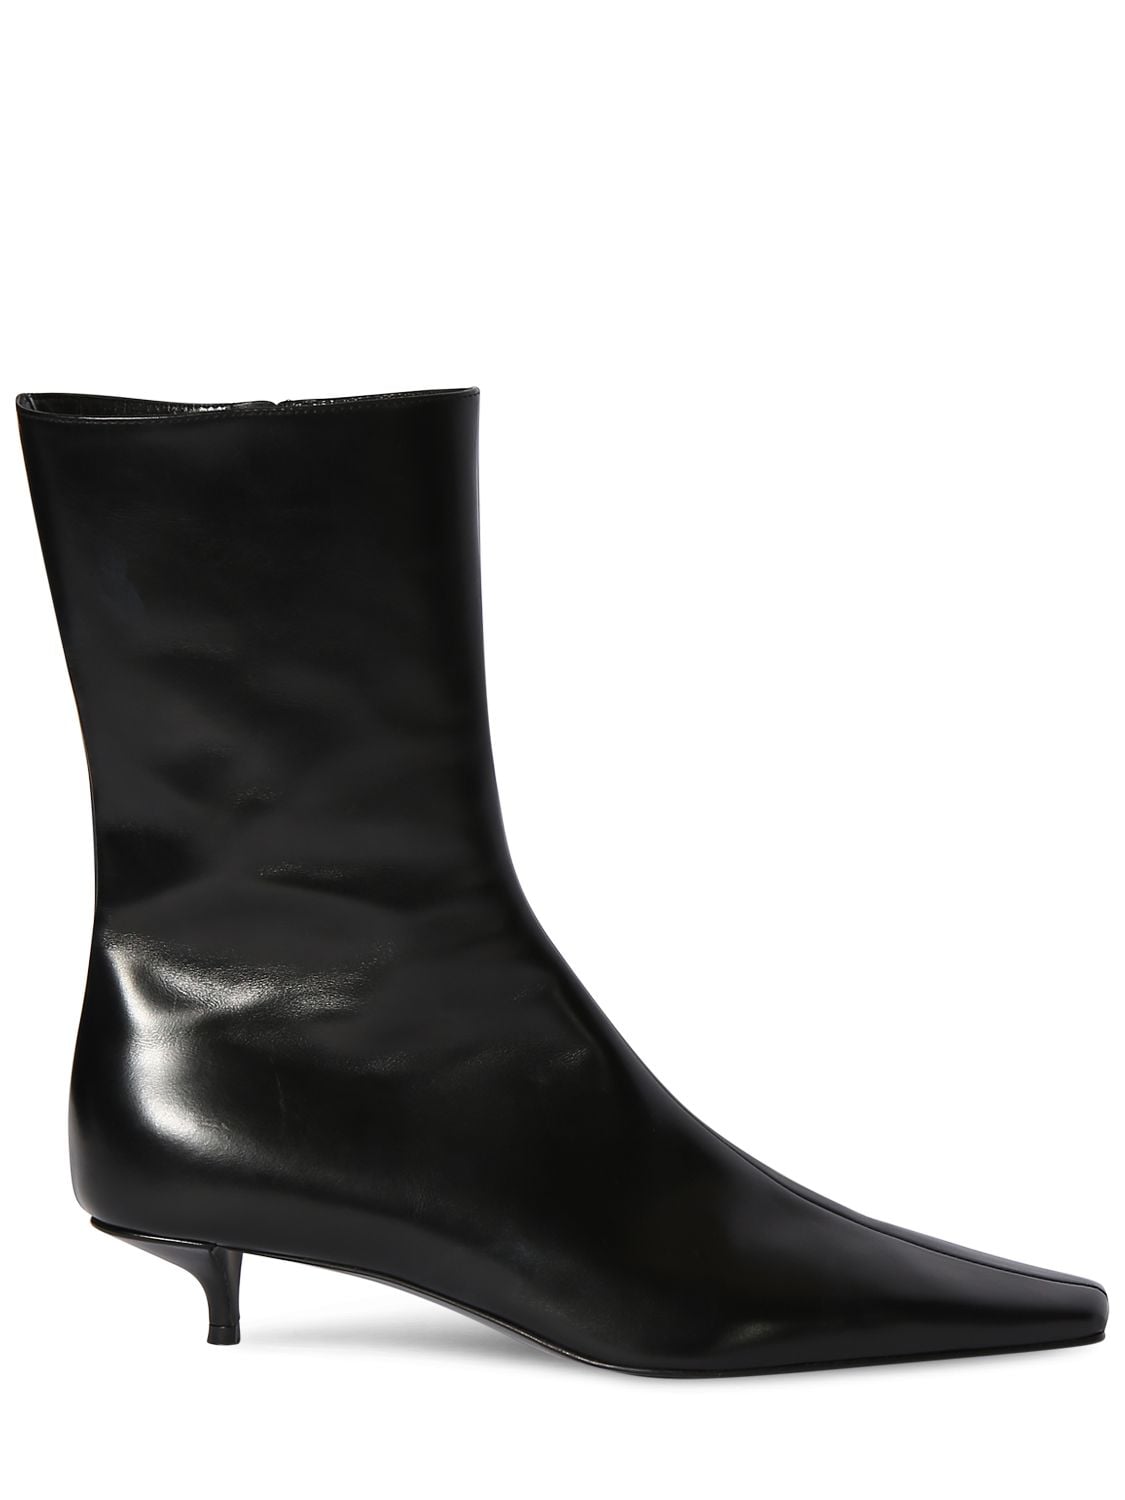 Image of 35mm Shrimpton Leather Boots